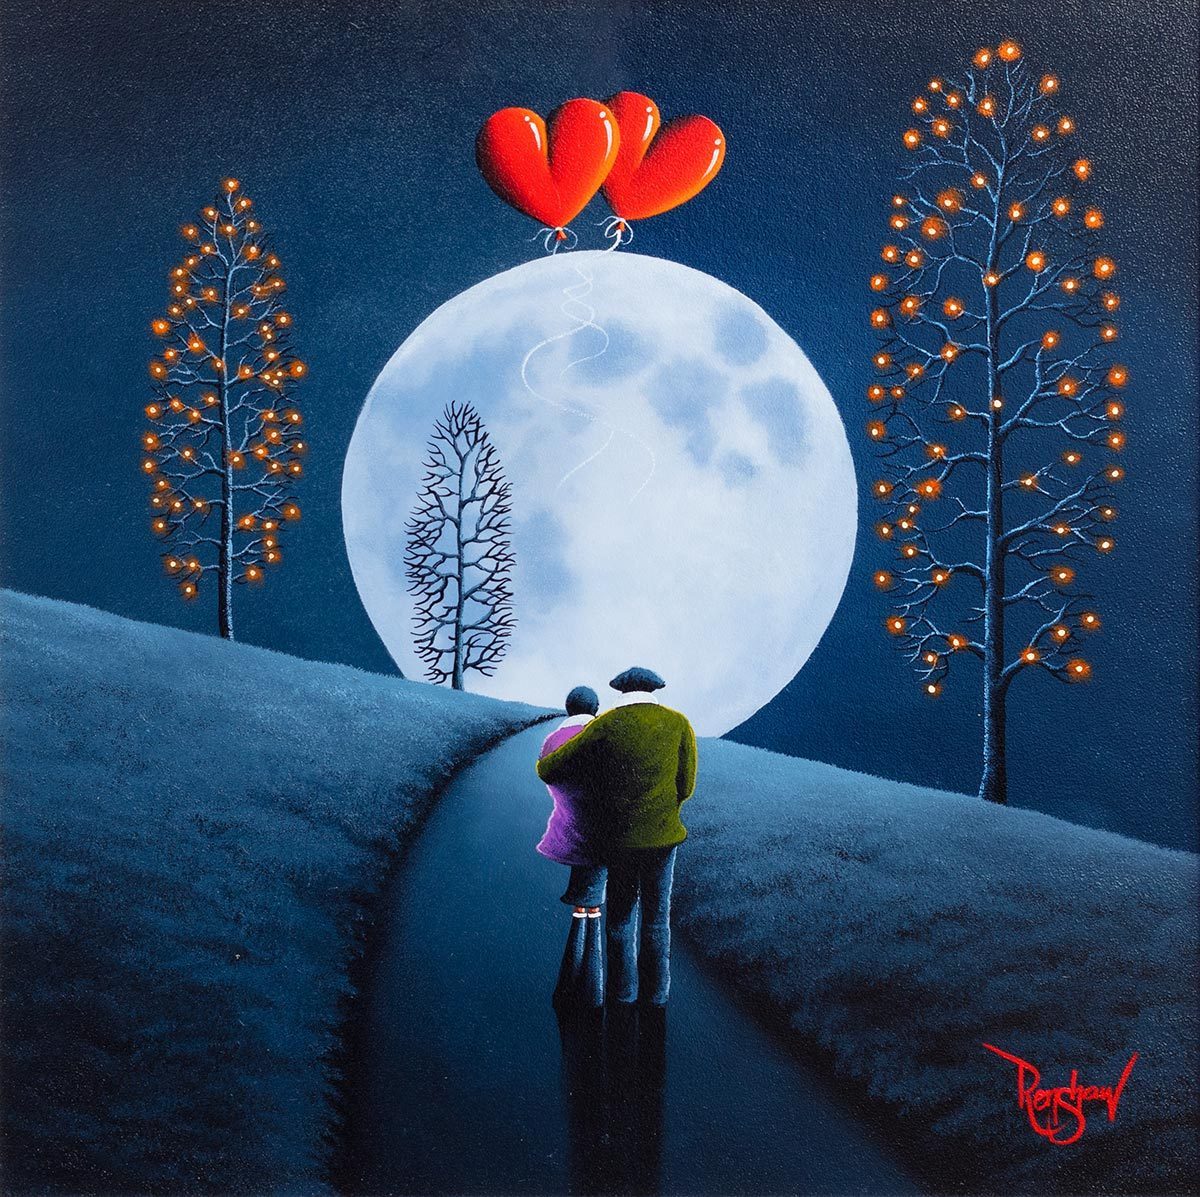 By Pale Moonlight - Original - SOLD